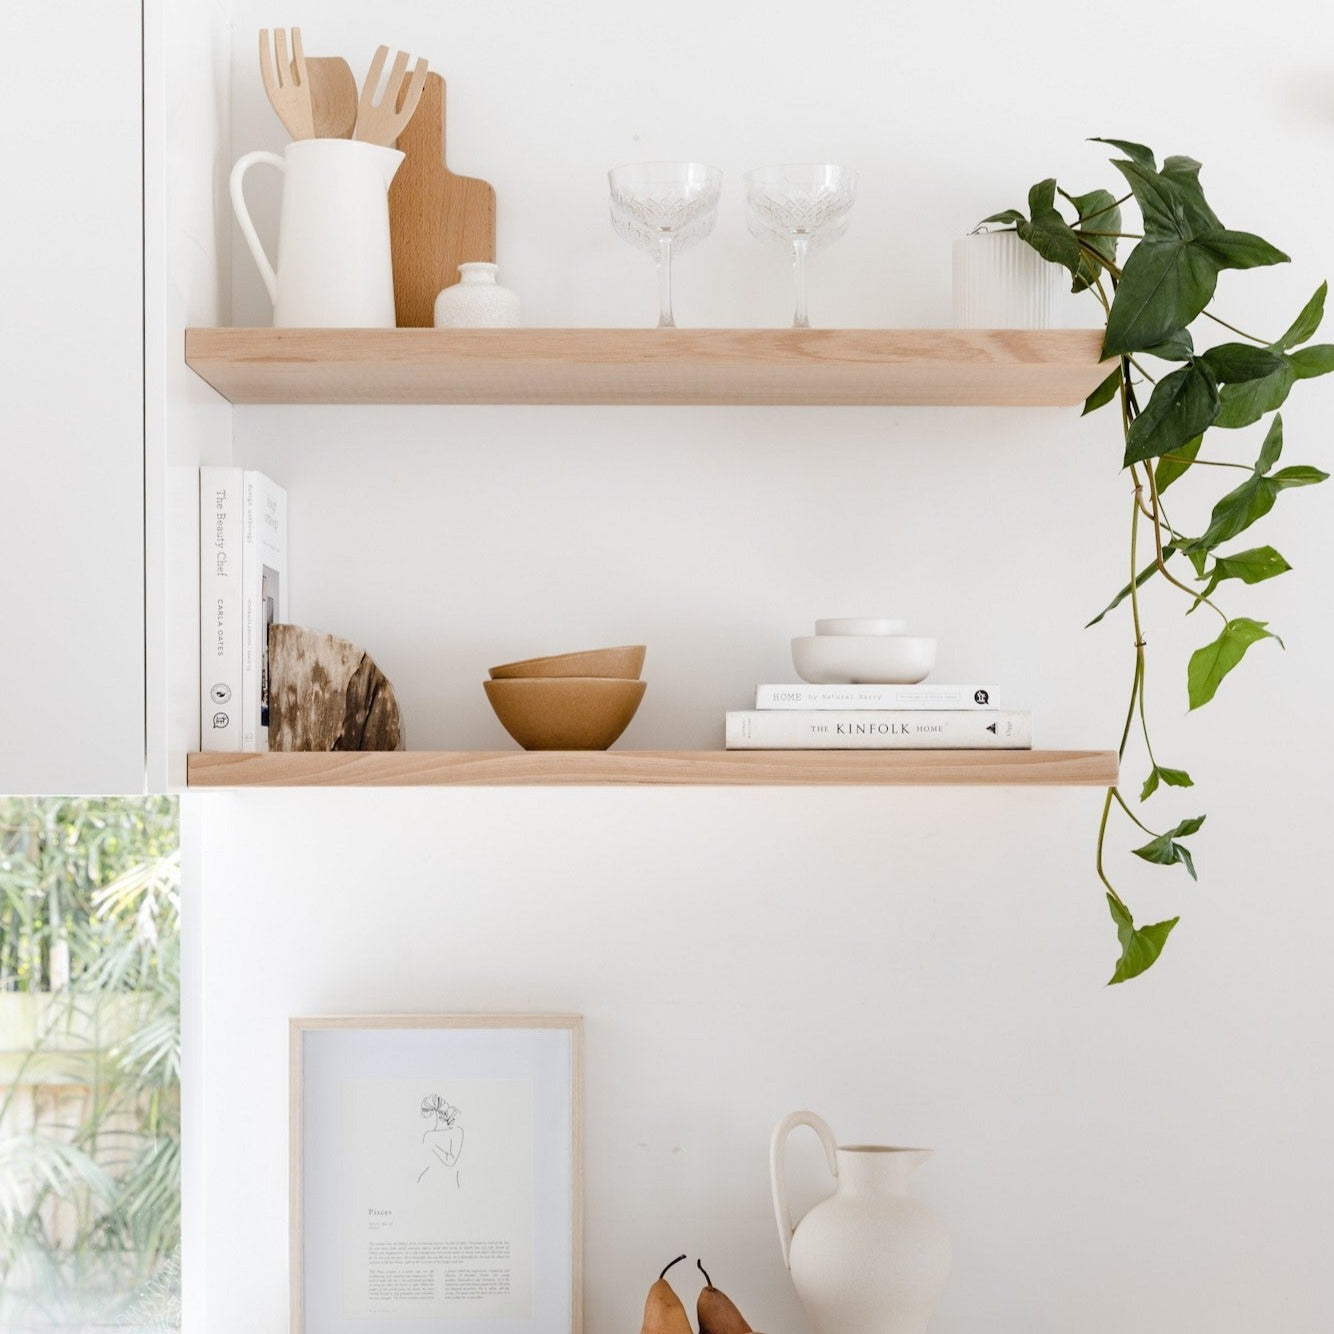 books and crockeries on timber floating shelves